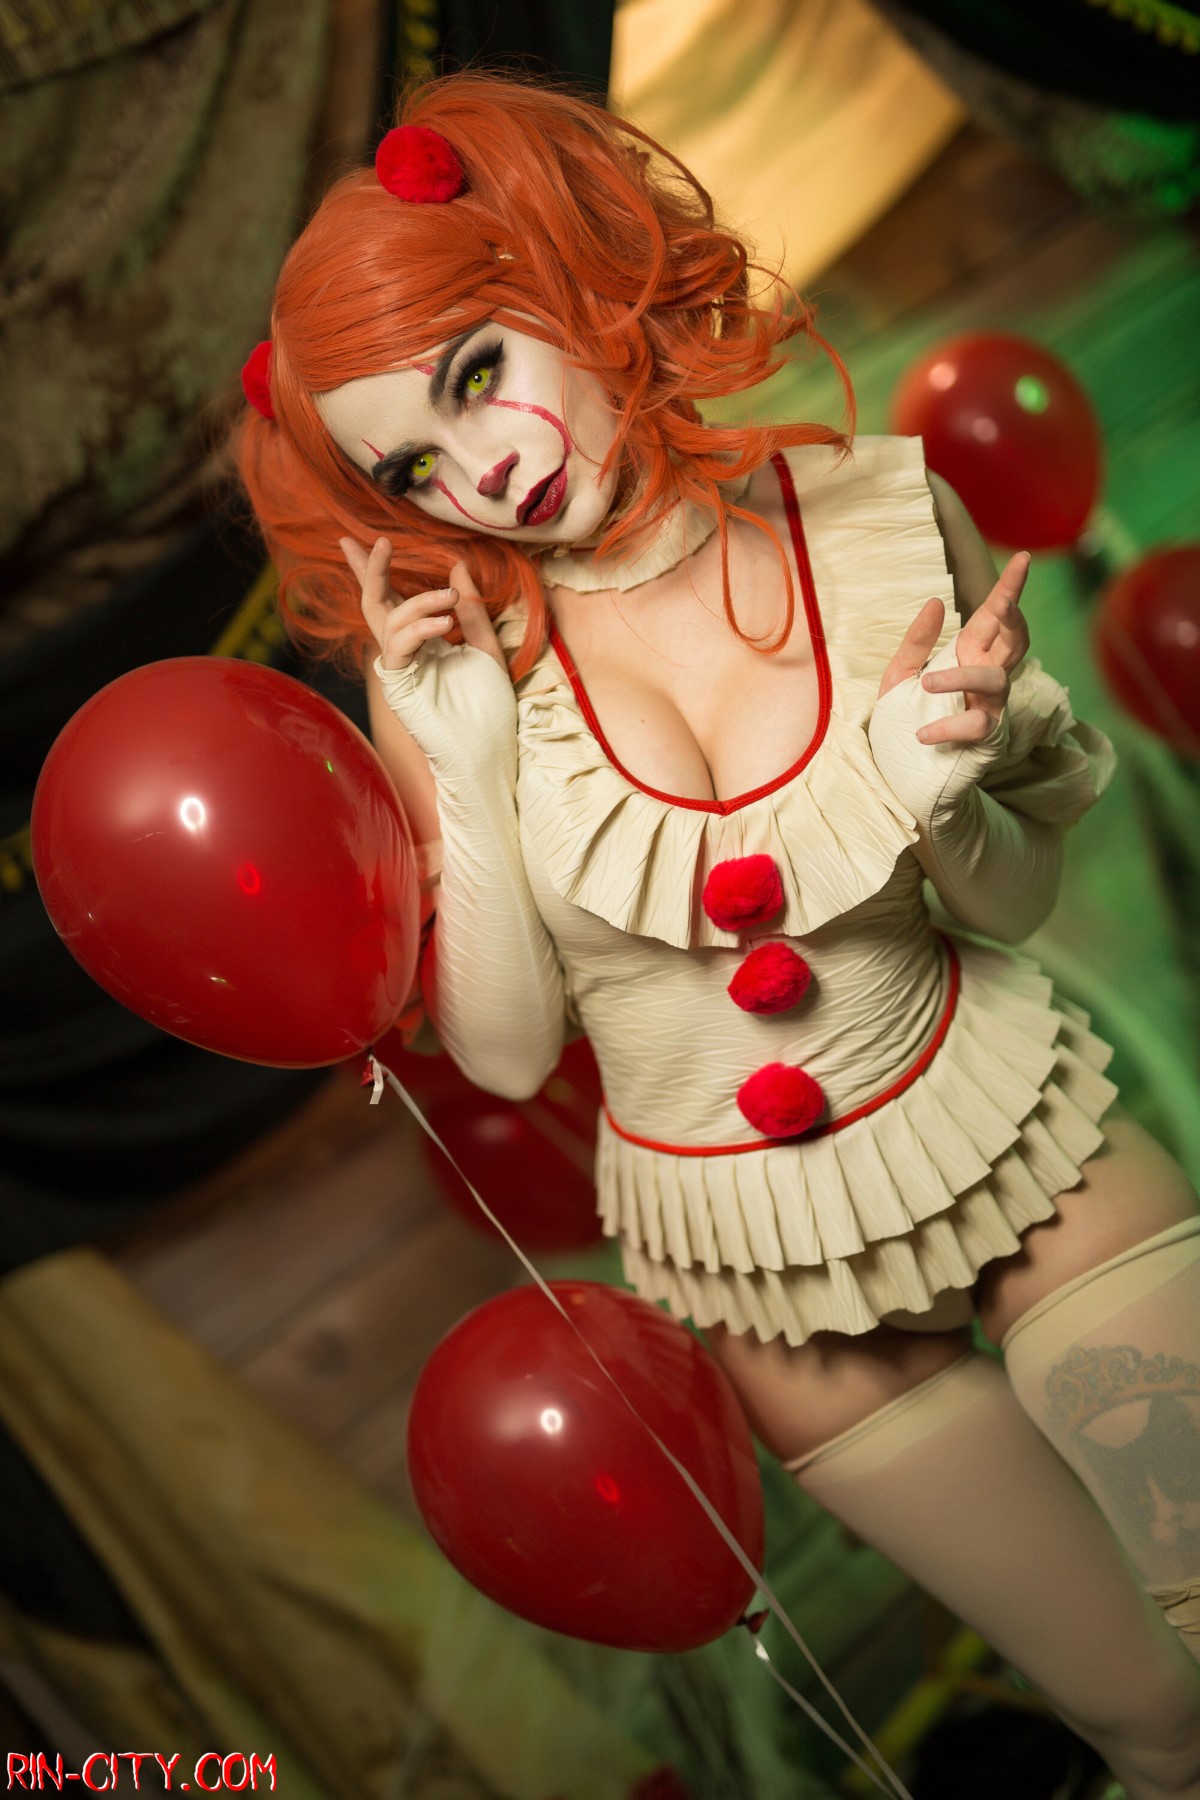 Rin City Pennywise 0020 5947442335.jpg